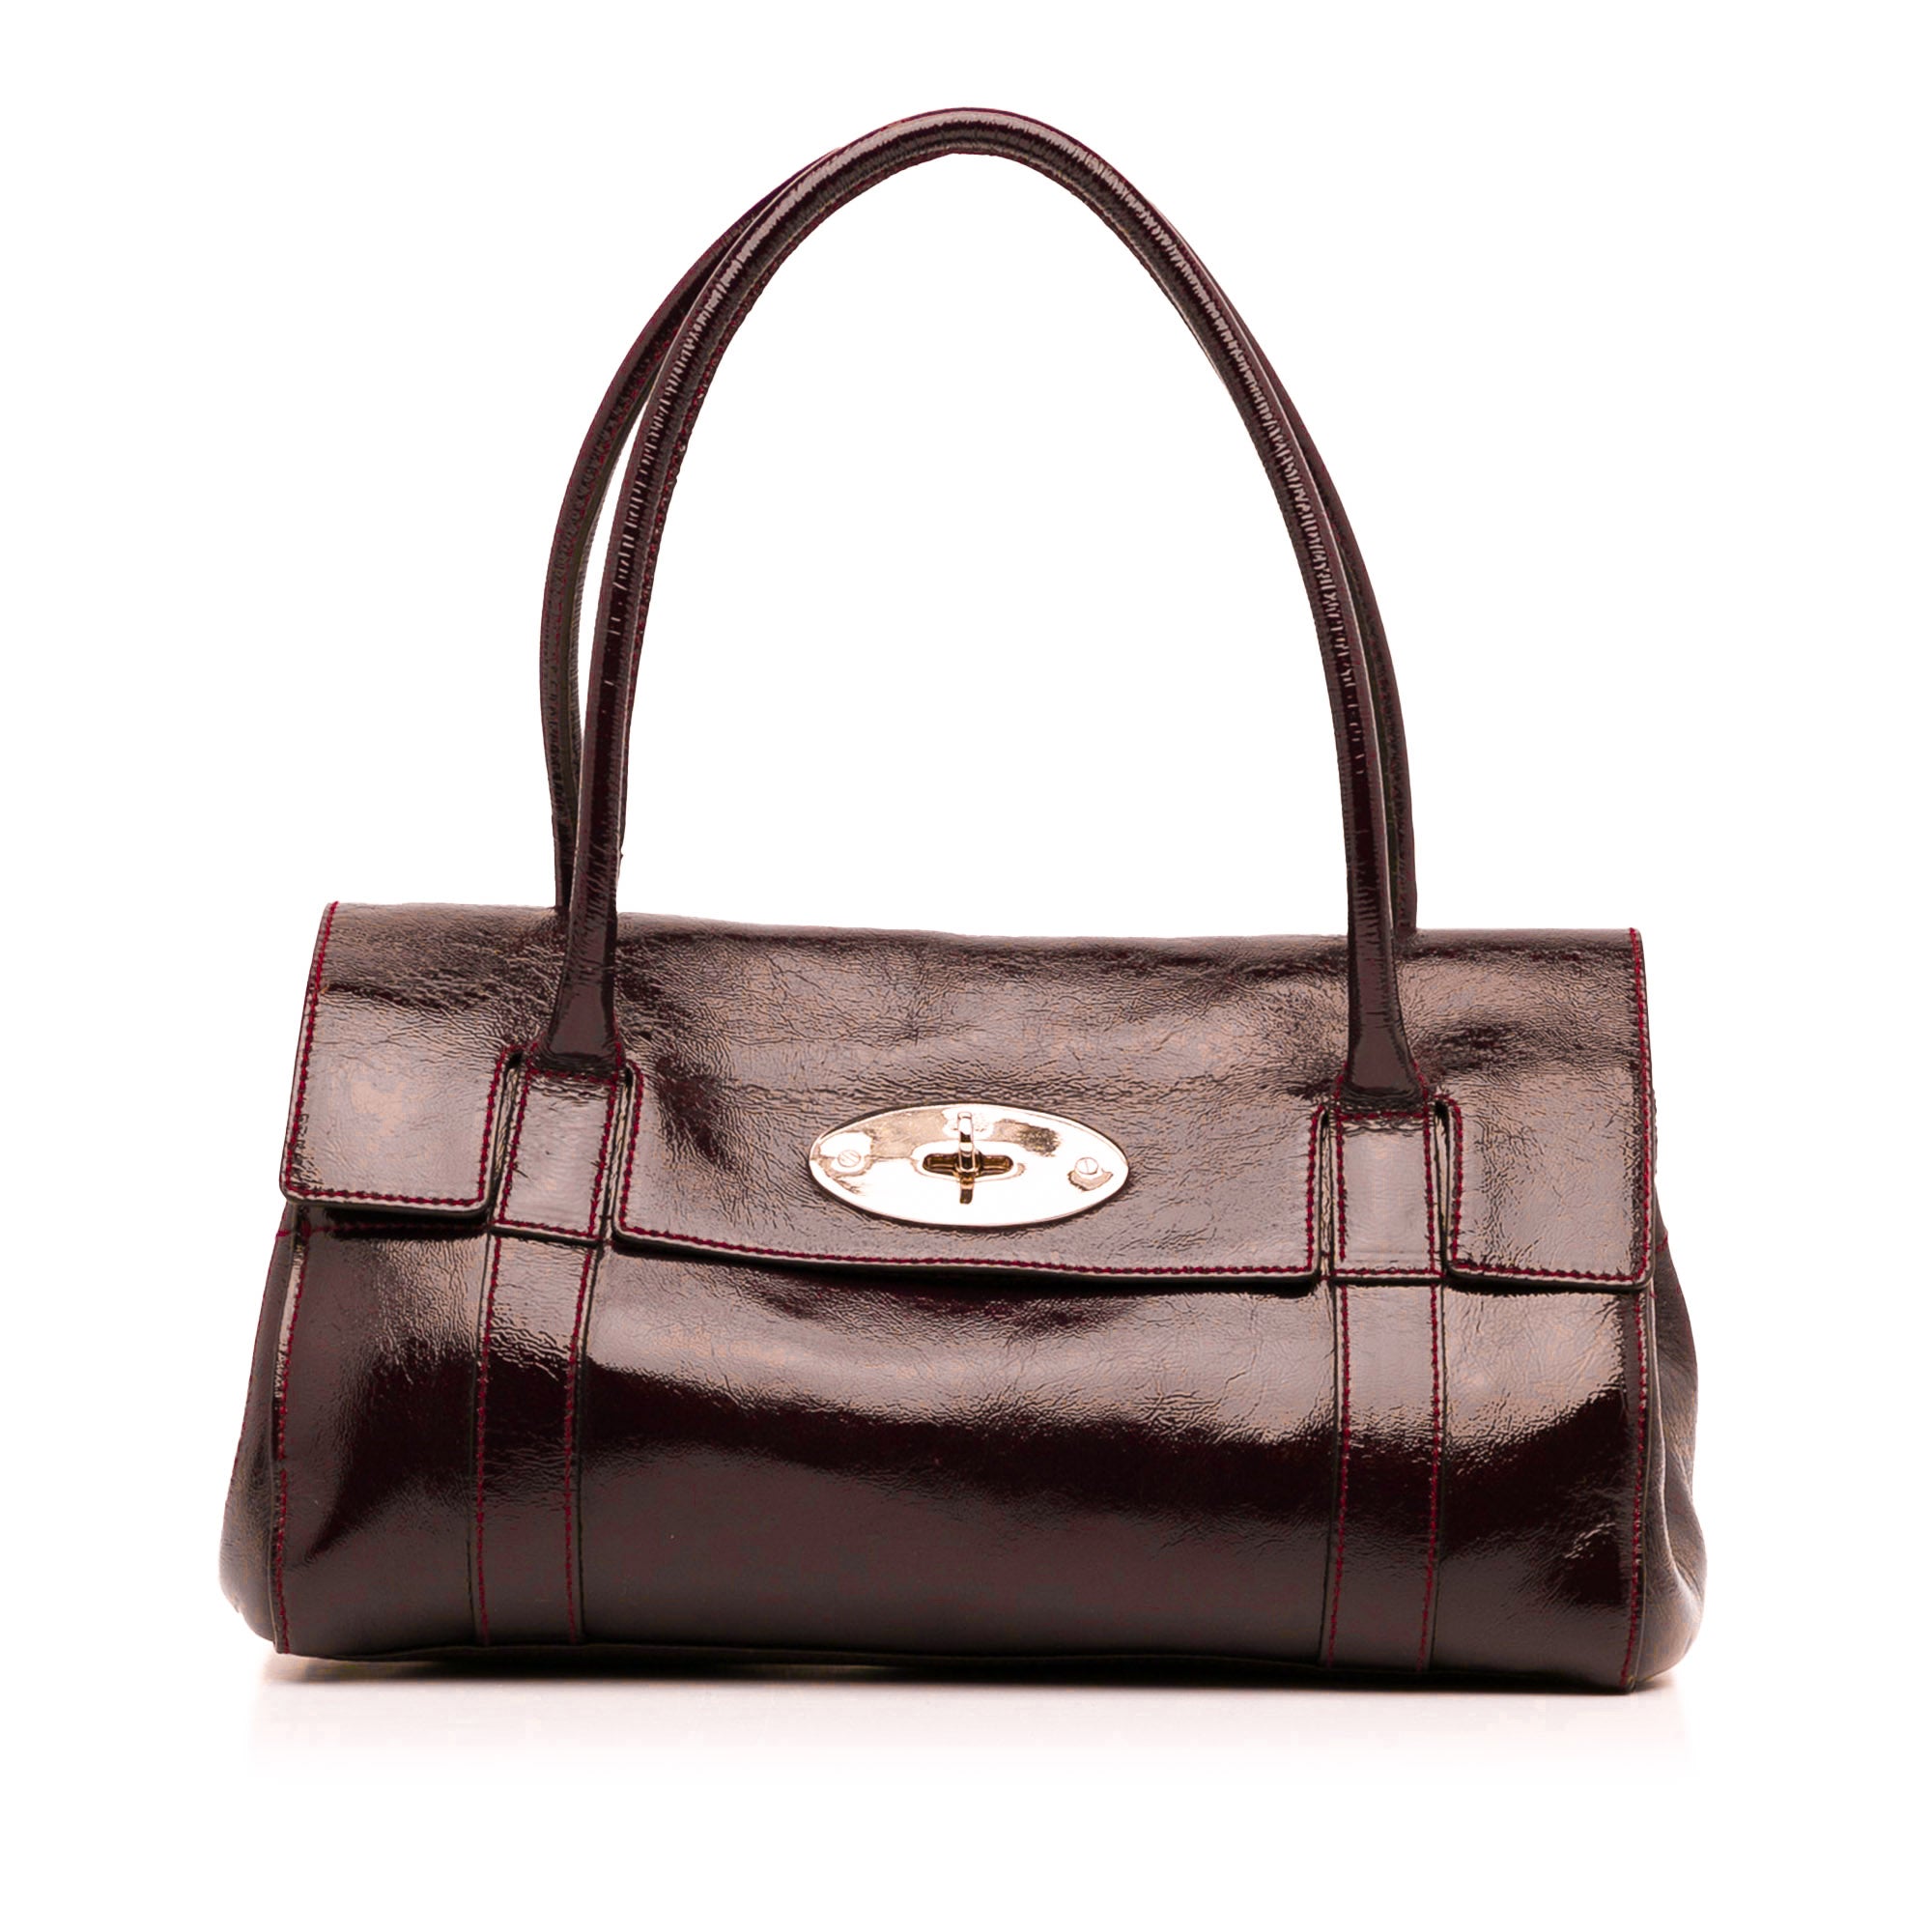 Mulberry East West Bayswater Leather Bag